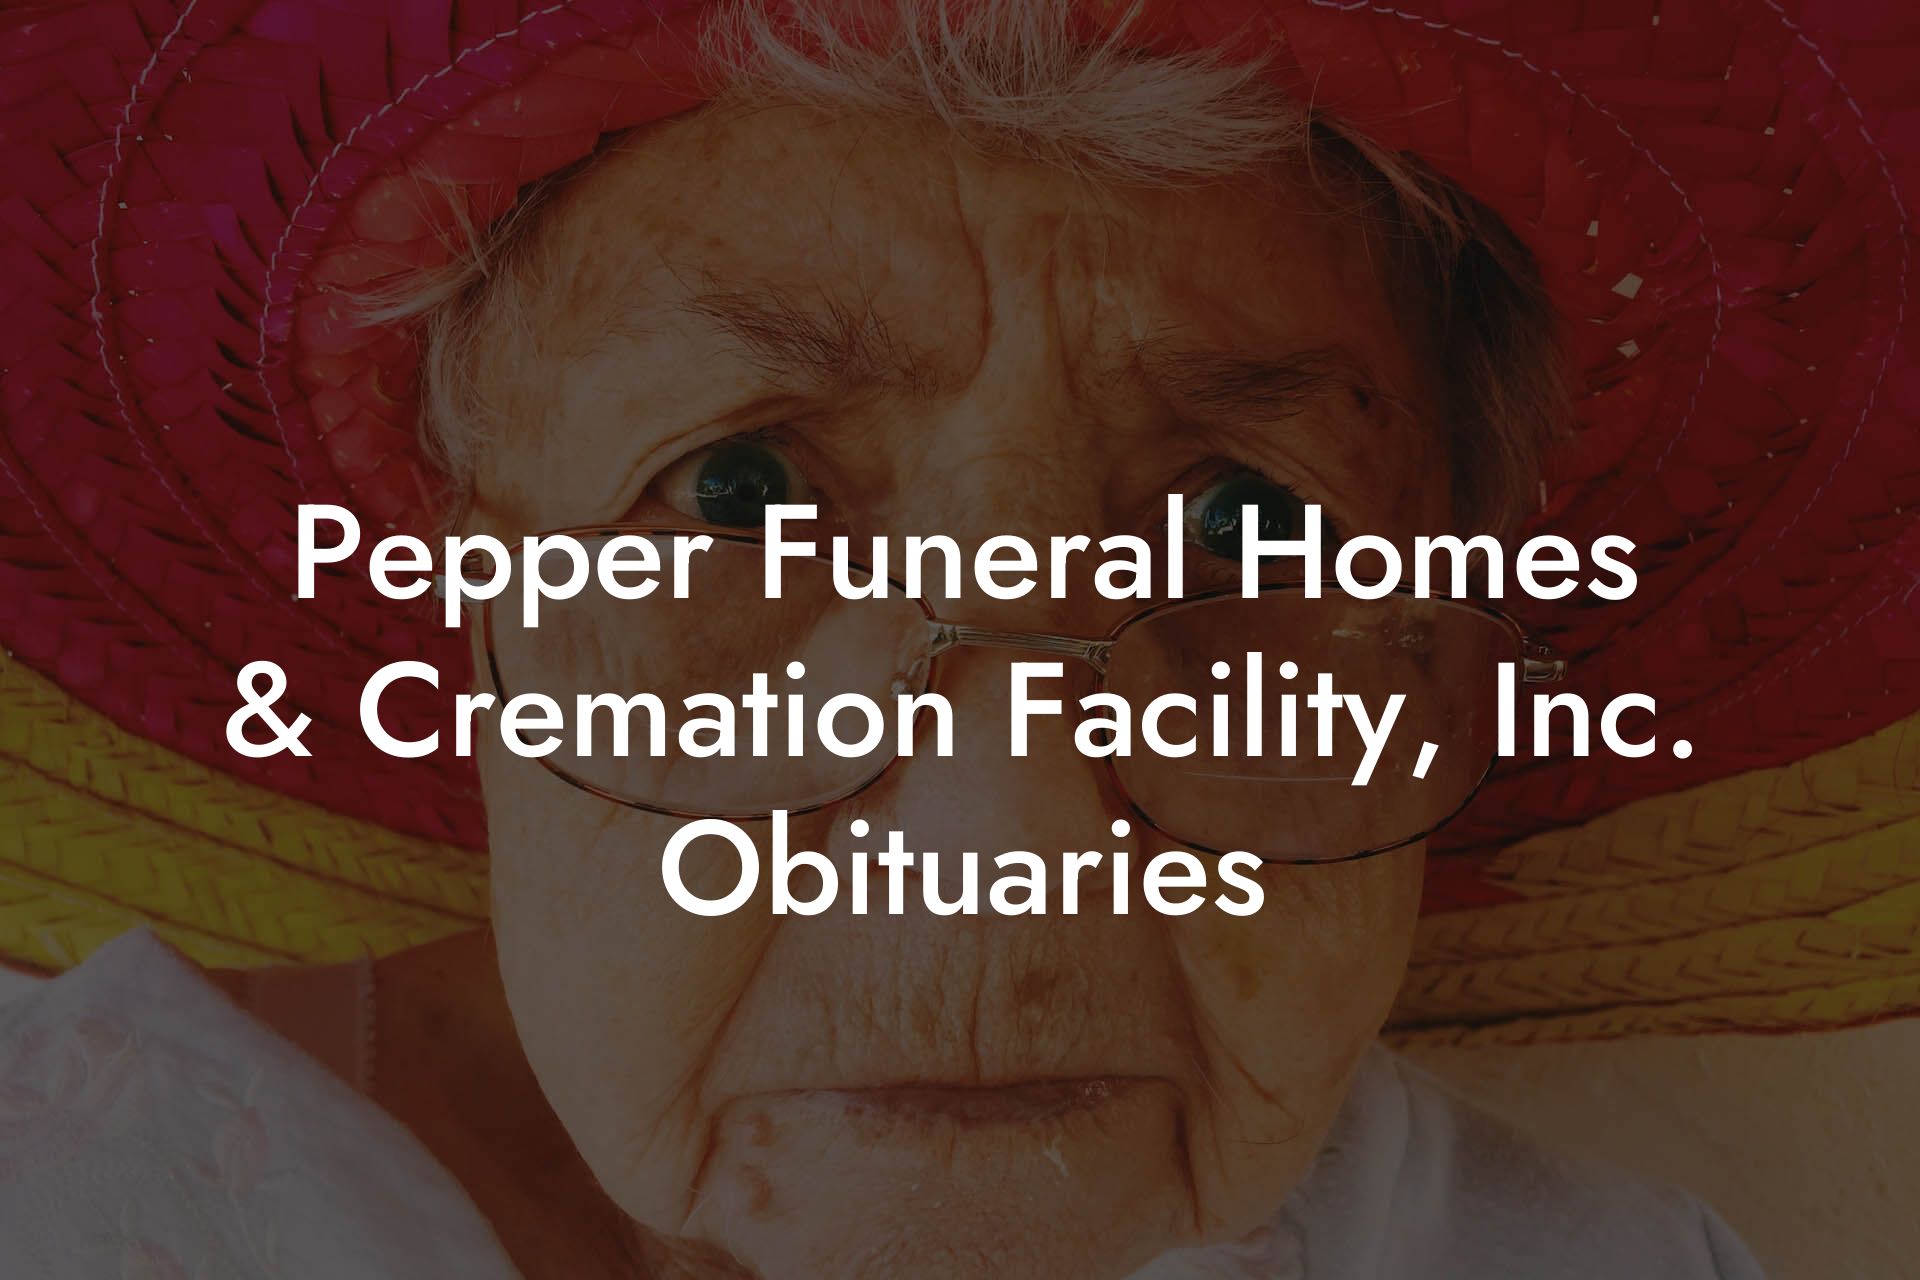 Pepper Funeral Homes & Cremation Facility, Inc. Obituaries